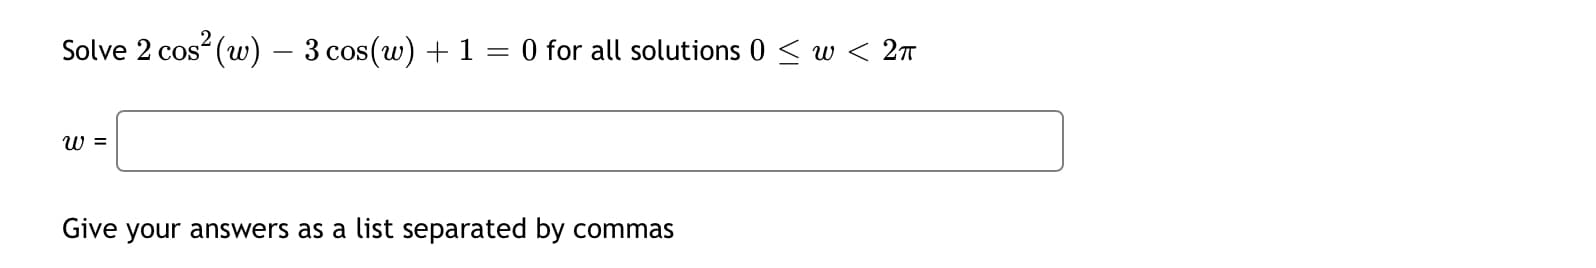 2
Solve 2 cos (w) – 3 cos(w) + 1 = 0 for all solutions 0 < w < 27
||
W =
Give your answers as a list separated by commas
